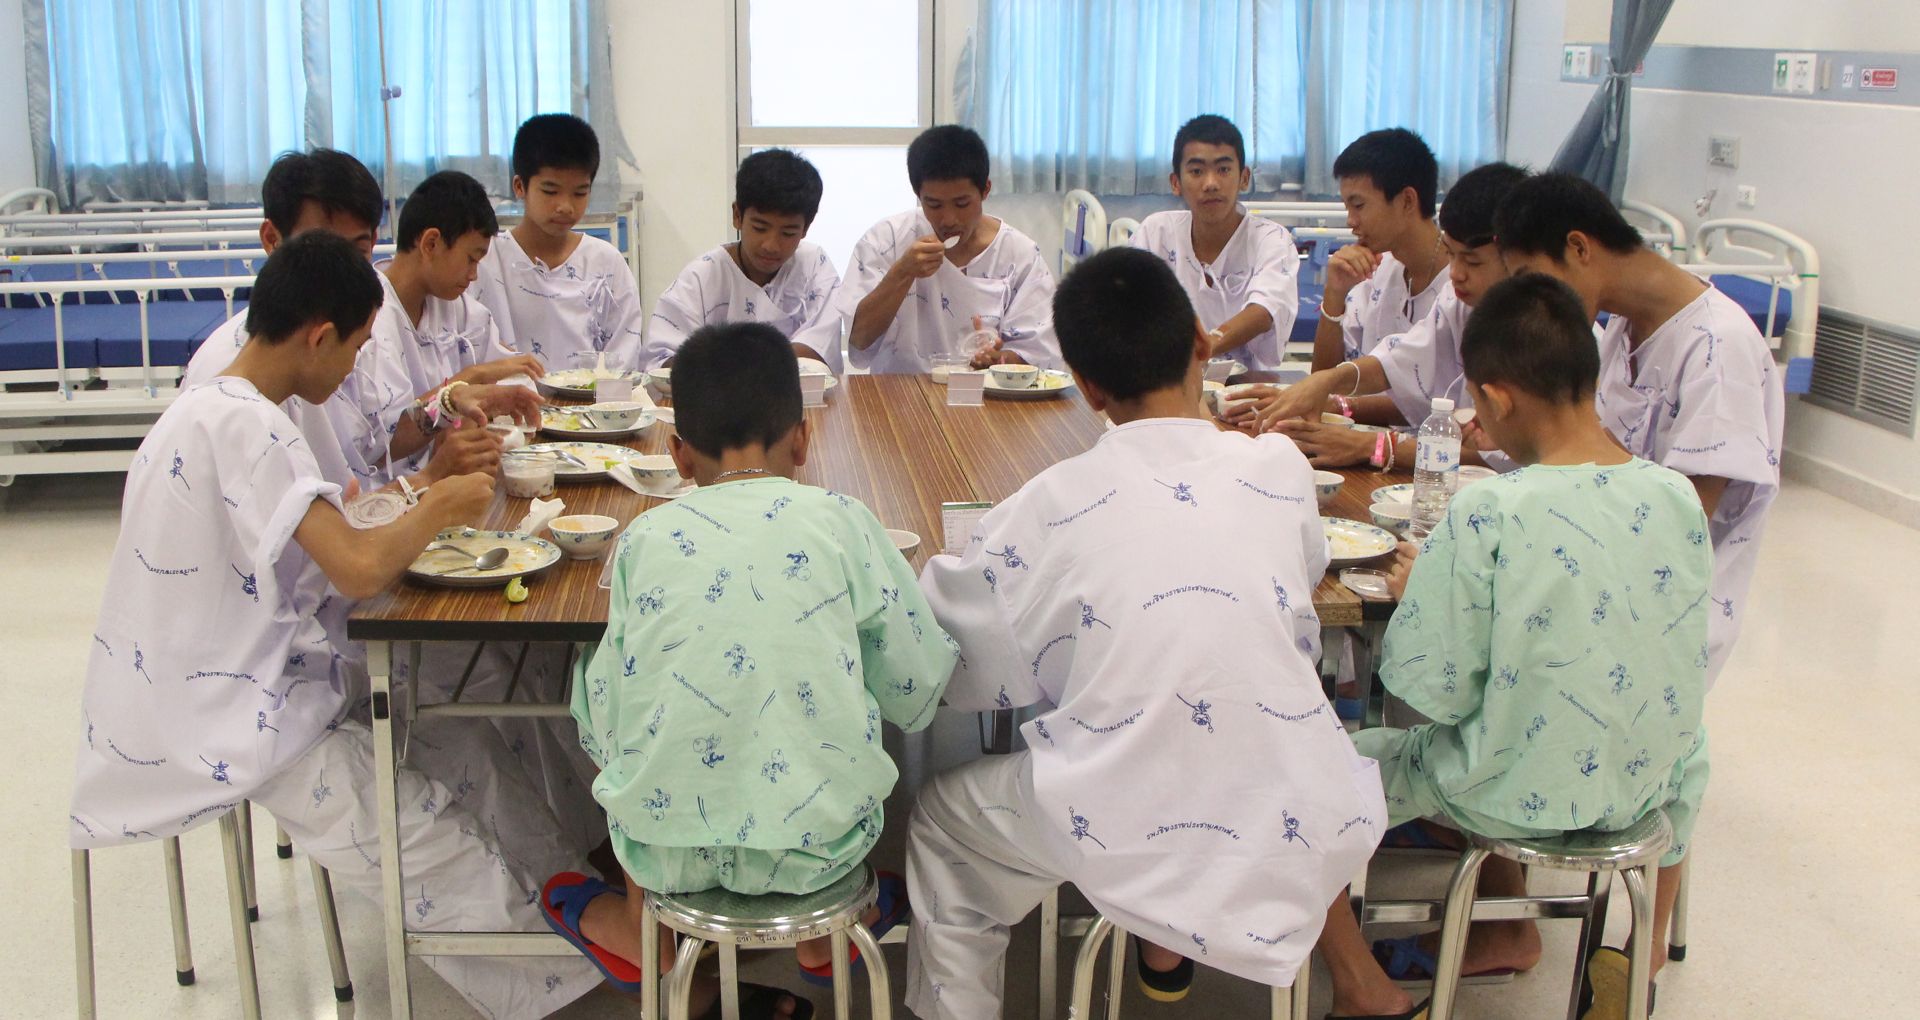 epa06889705 A handout photo made available by the Chiang Rai Prachanukroh Hospital and the Ministry of Public Health shows some of the 13 rescued soccer team members having a meal together in Chiang Rai province, Thailand, 14 July 2018. Thirteen members of a Thai soccer team, including their assistant coach, were rescued from Tham Luang cave after being trapped for nearly two weeks.  EPA/PUBLIC HEALTH MINISTRY / HANDOUT HANDOUT EDITORIAL USE ONLY/NO SALES HANDOUT EDITORIAL USE ONLY/NO SALES